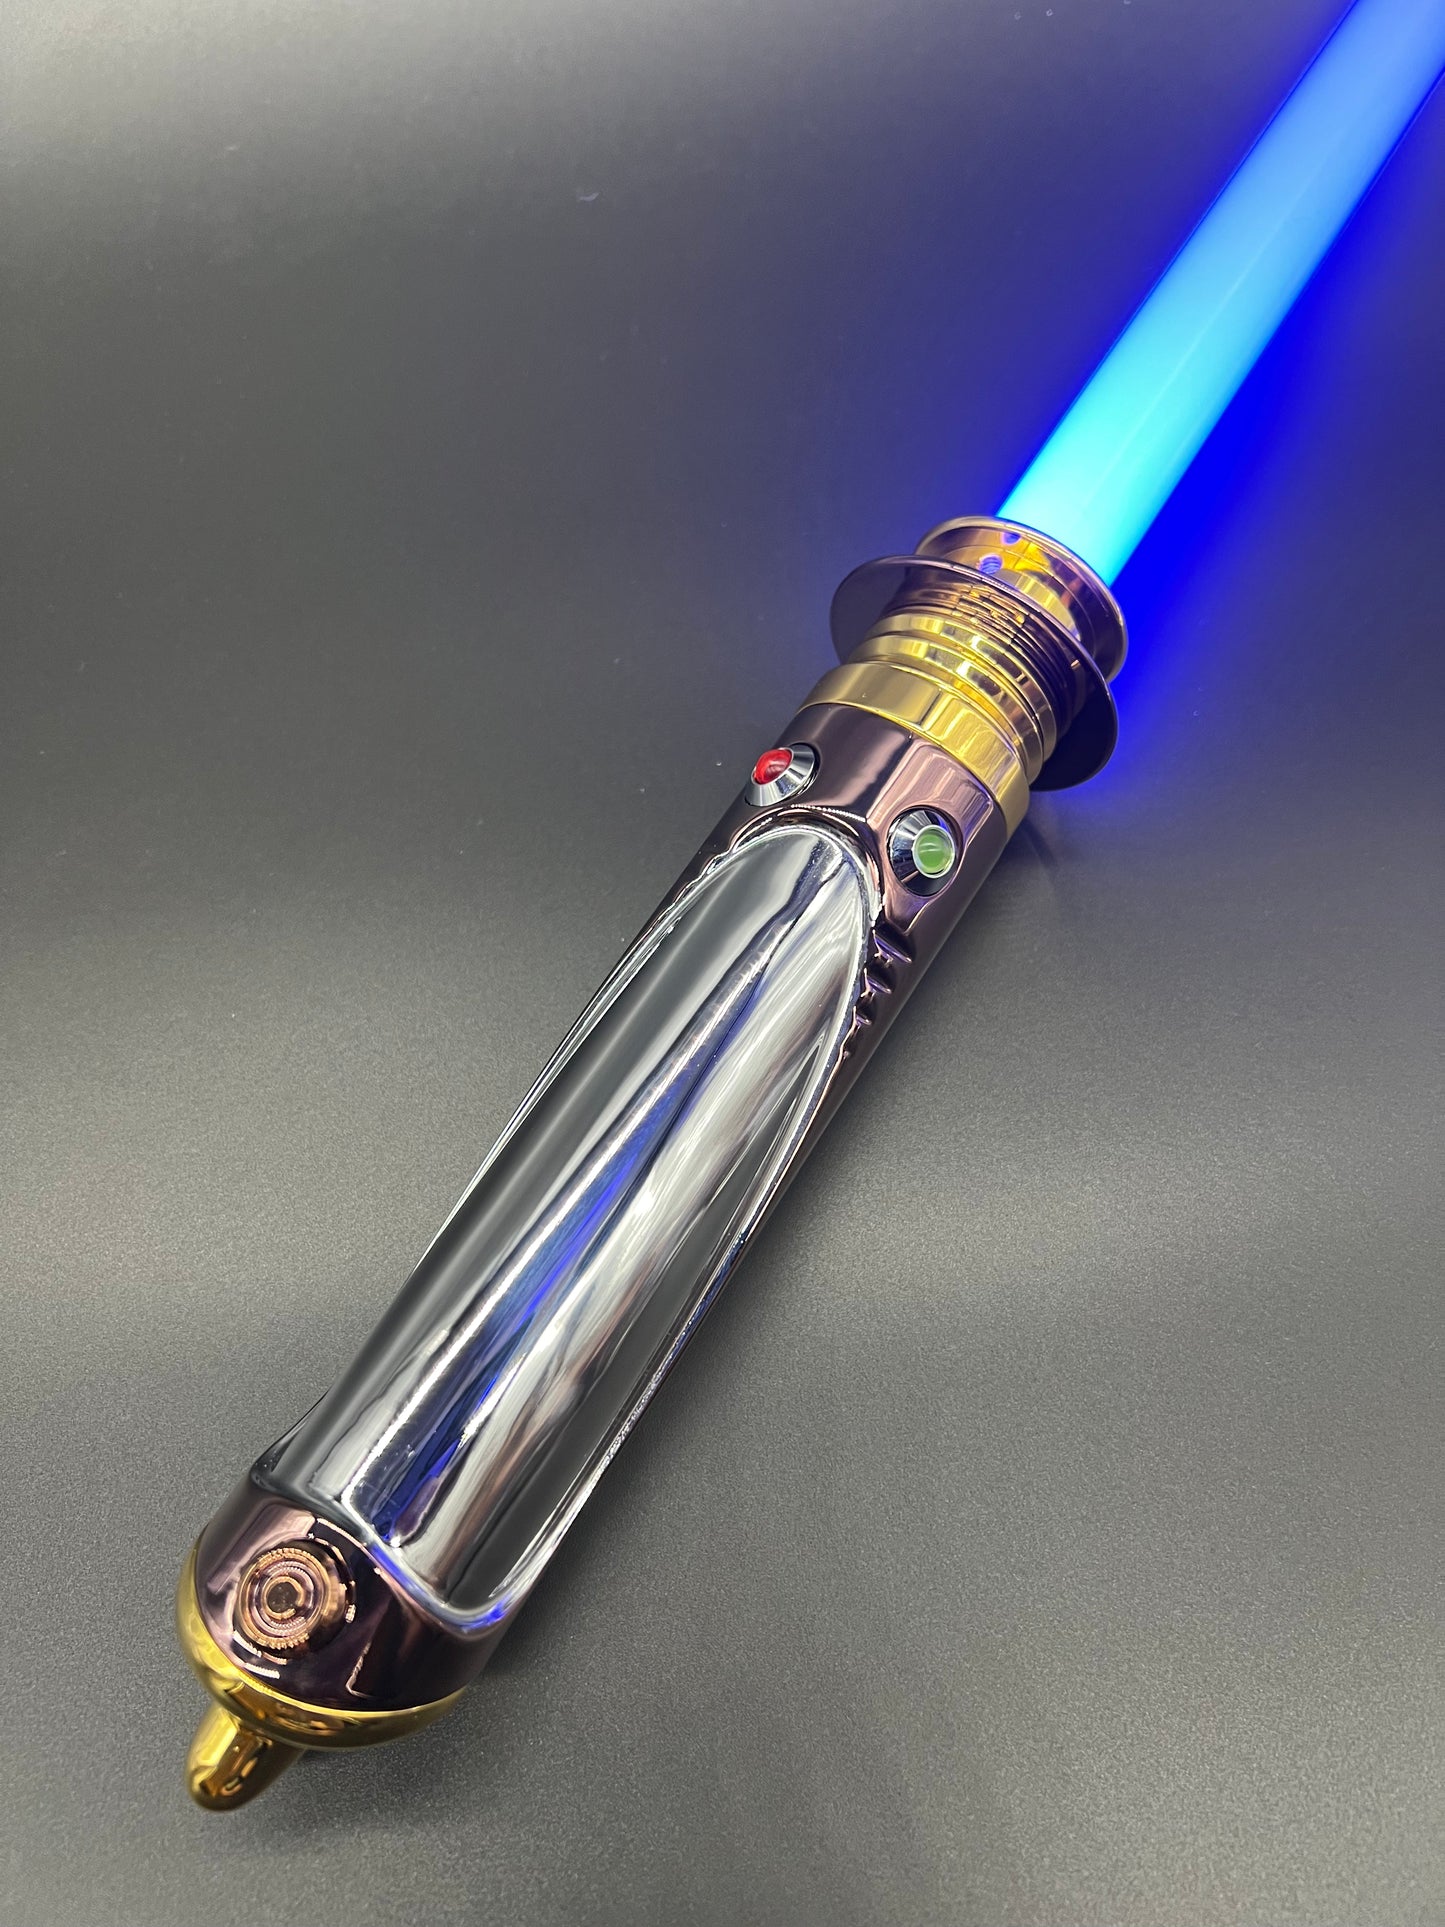 THE UNLIMITED POWER LIGHTSABER